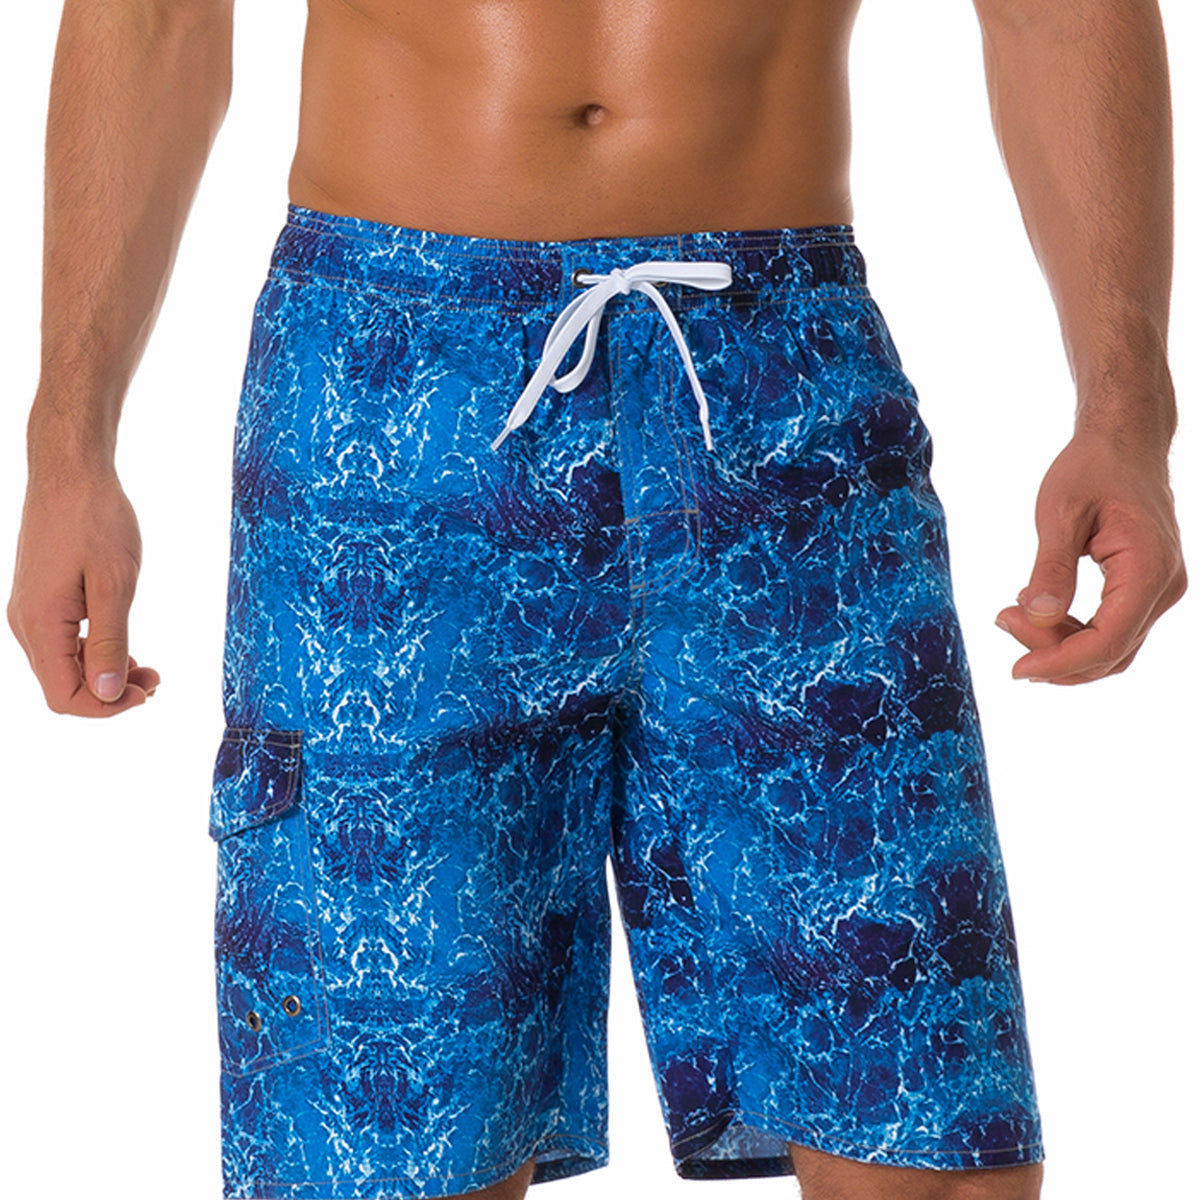 Men's Casual Multicolor Striped Summer Shorts Swimming Trunks